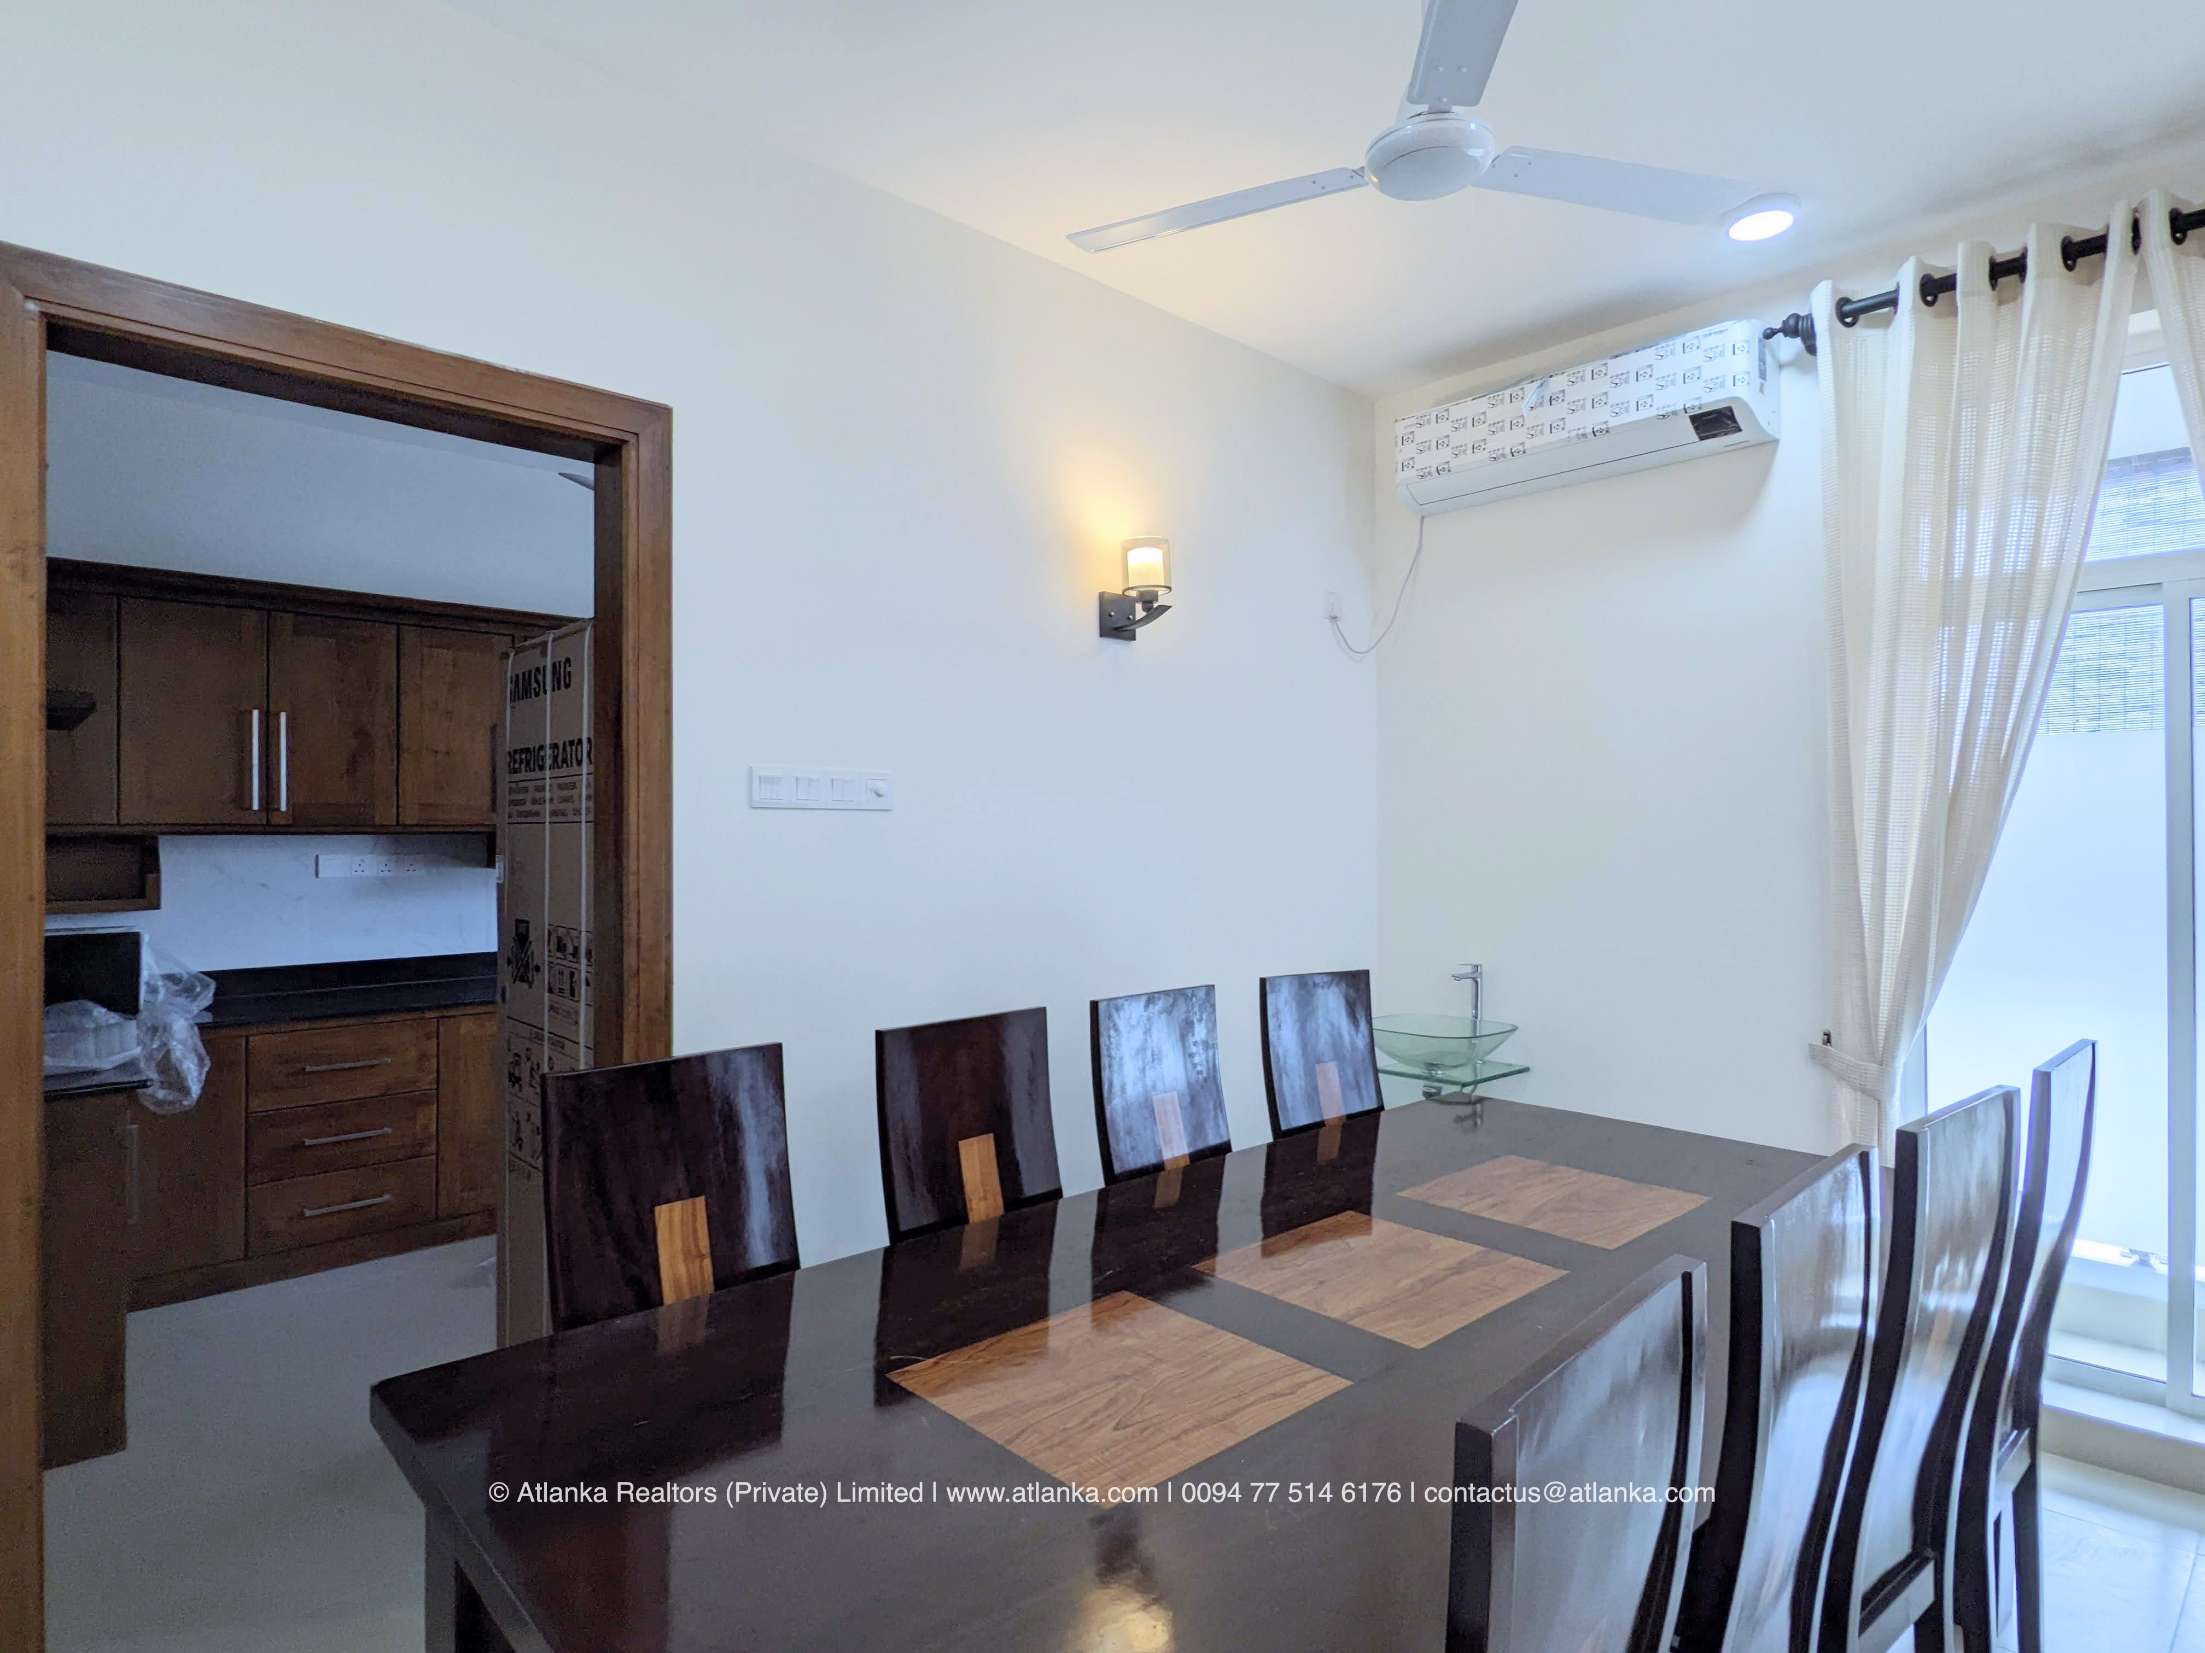 Apartment for Rent in Colombo